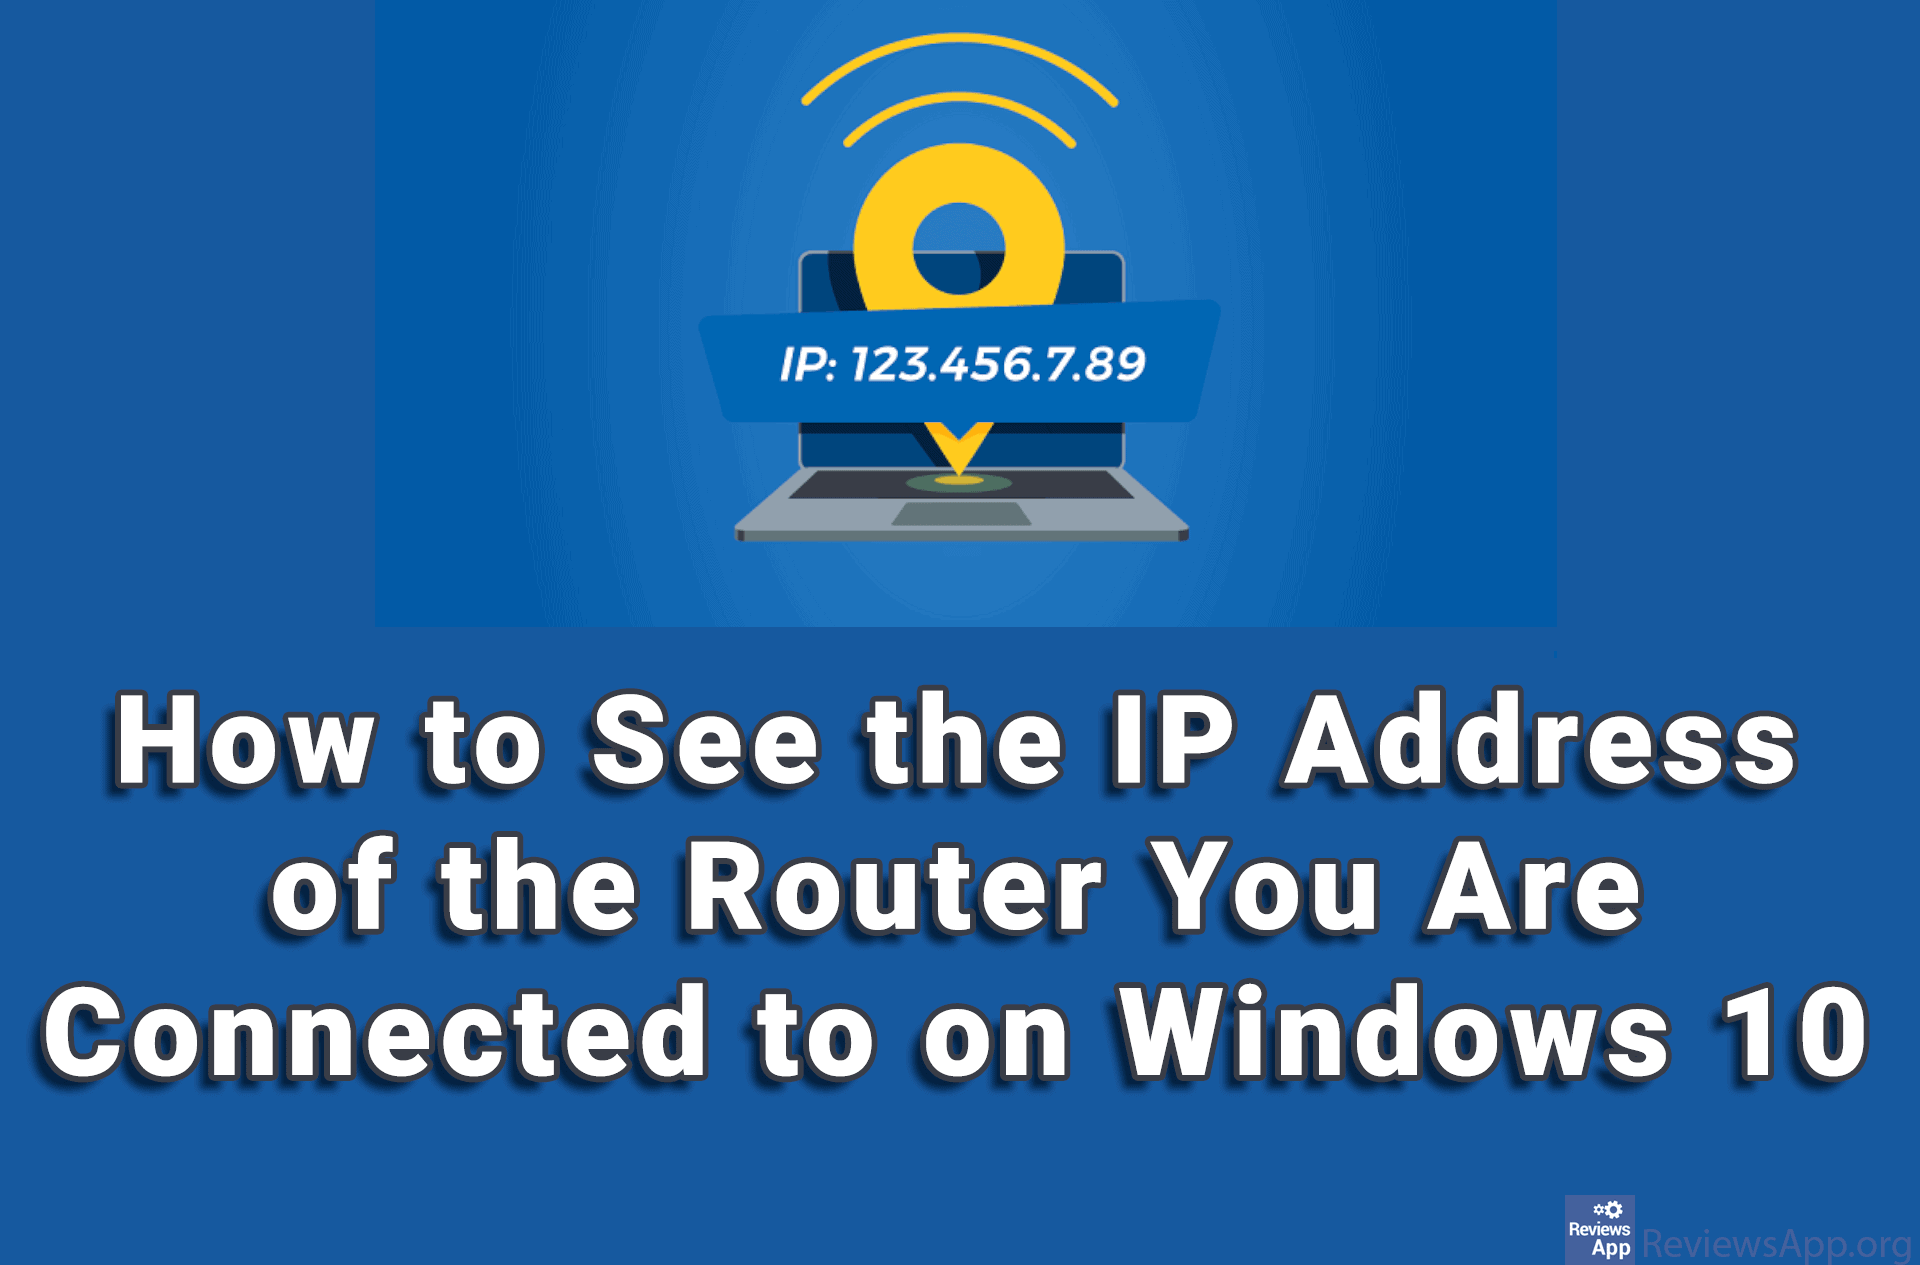 How to See the IP Address of the Router You Are Connected to on Windows 10